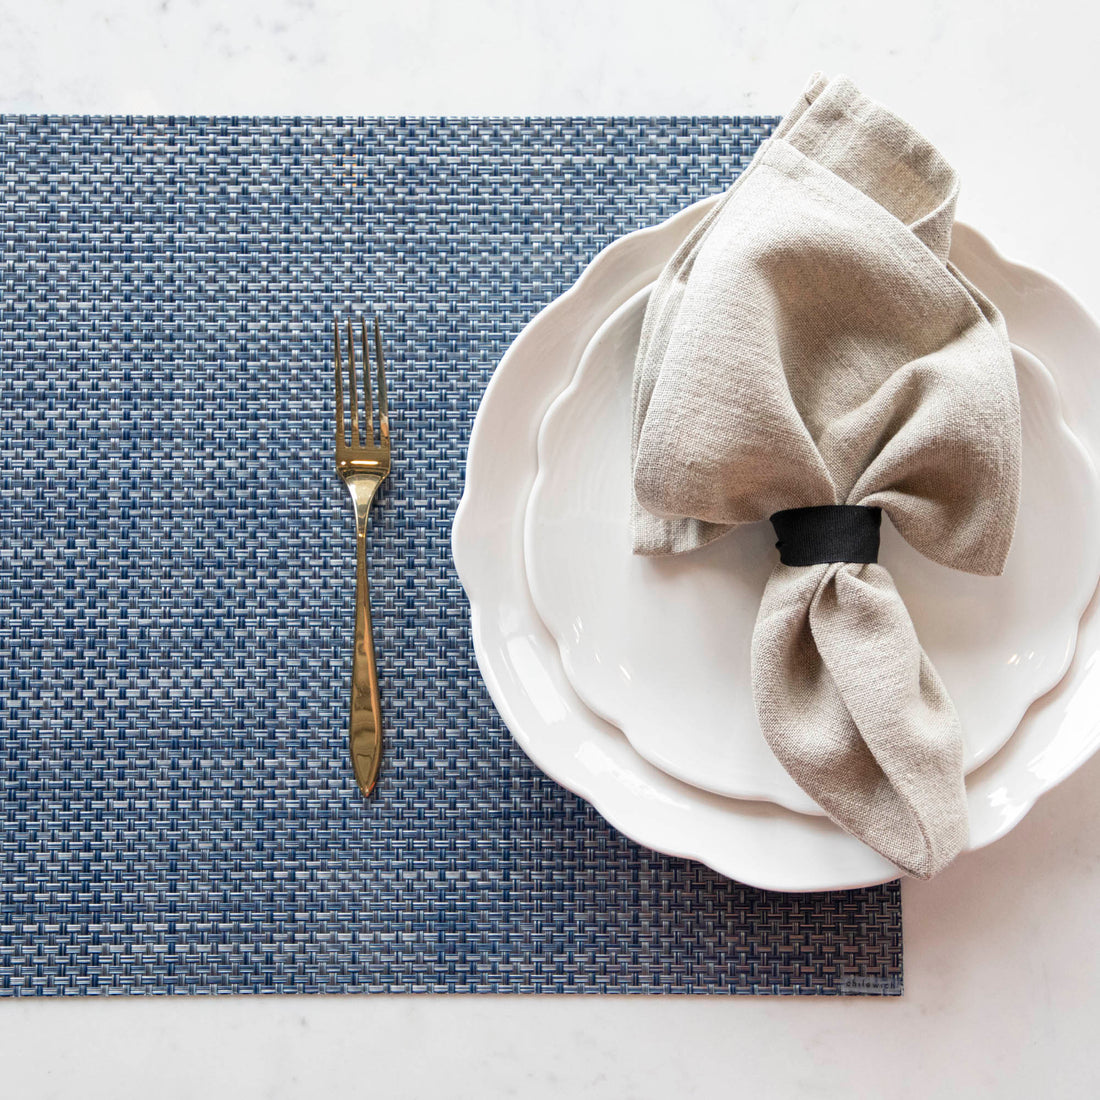 A Chilewich Basketweave Table Mat with a napkin and fork on a table.